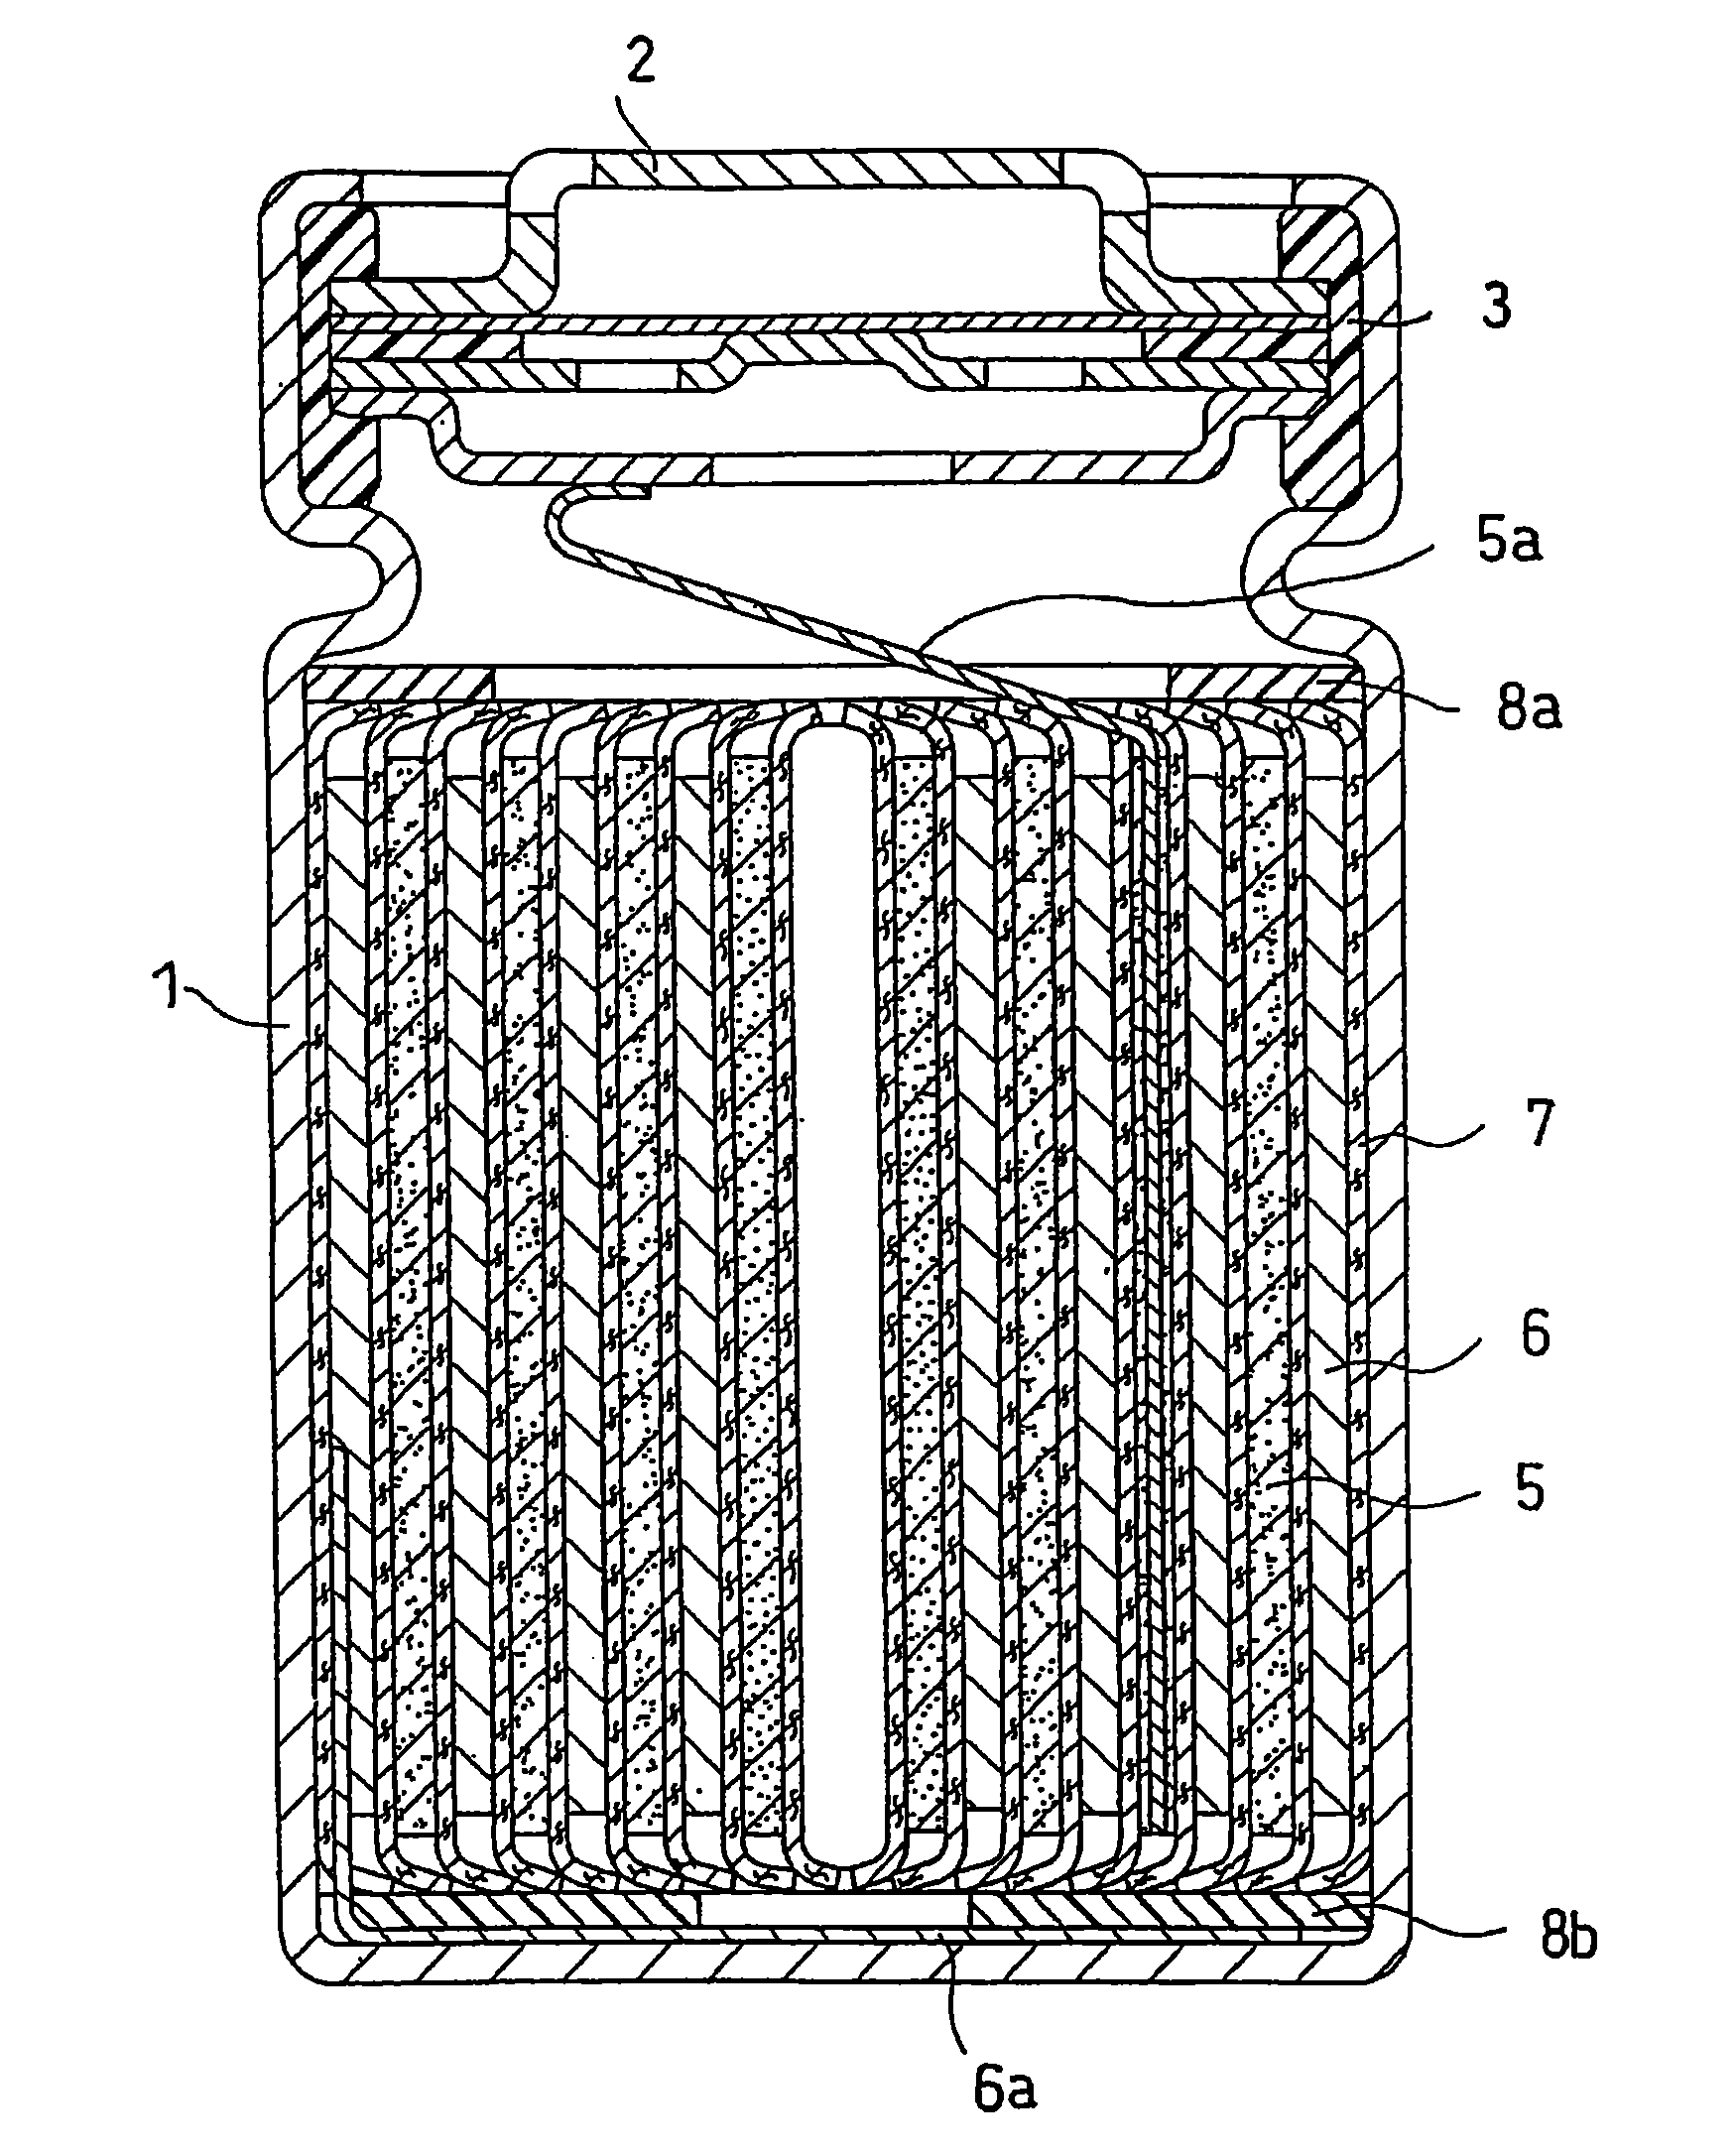 Lithium ion secondary battery with improved electrode stability and safety